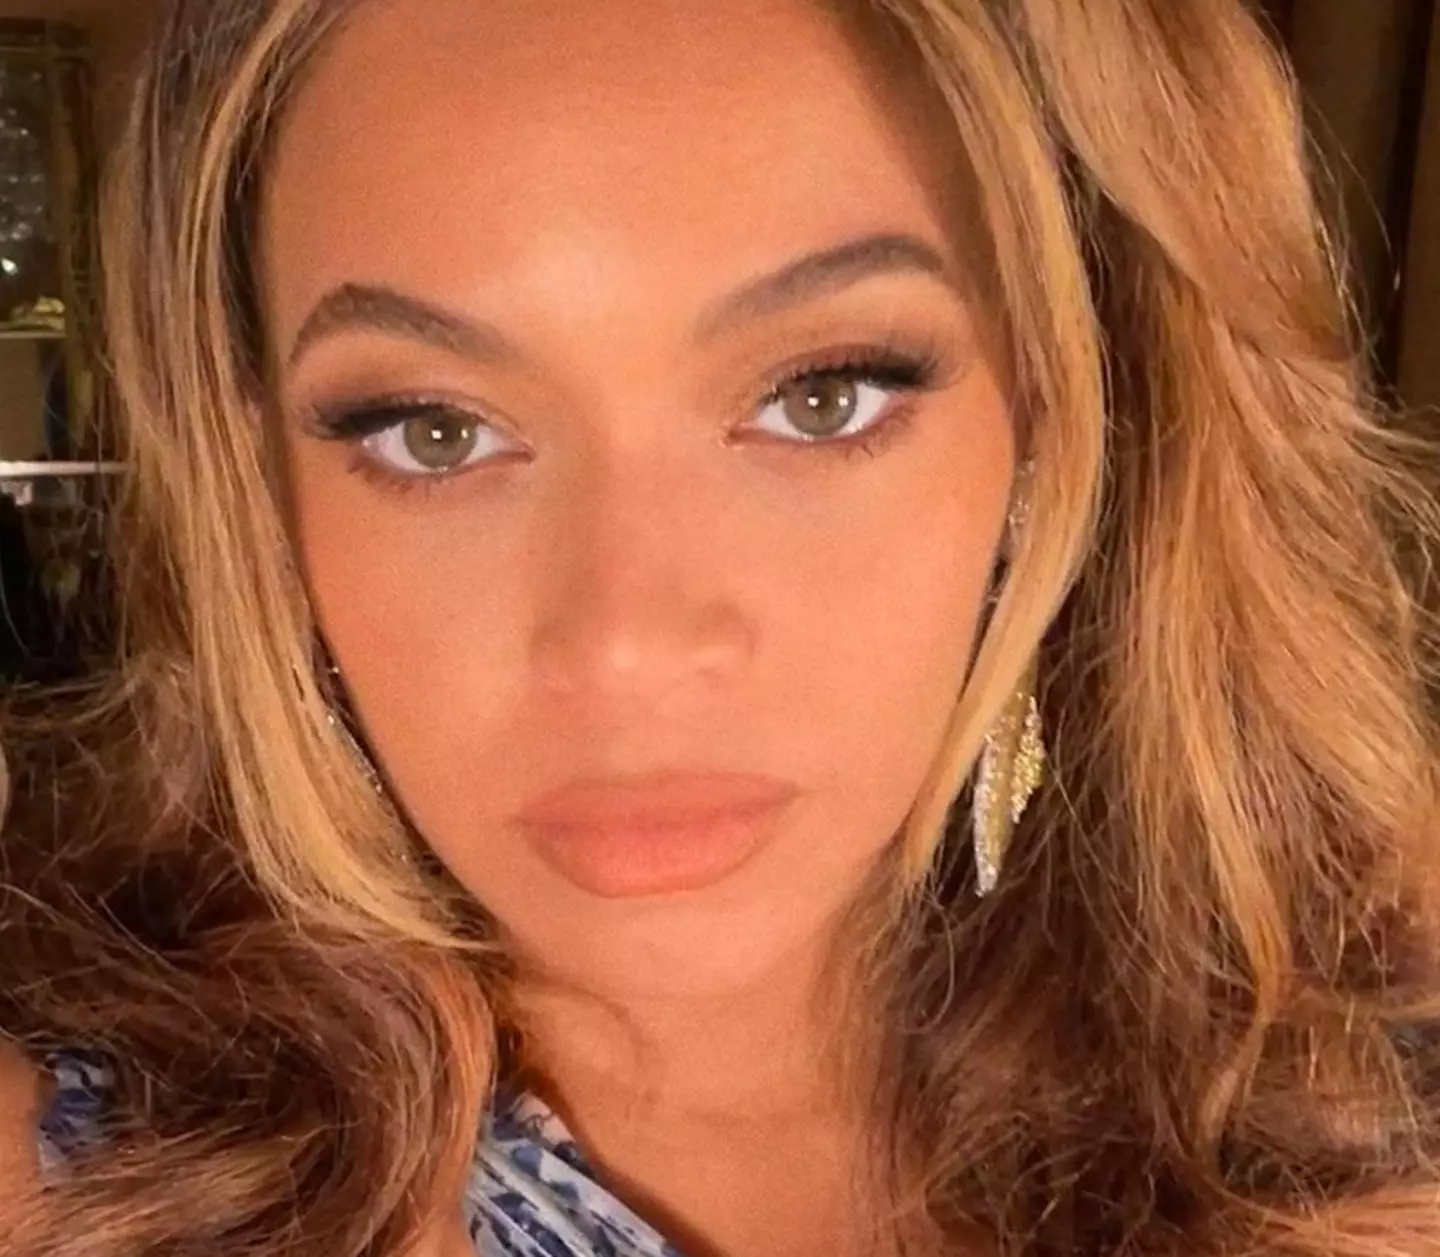 Beyoncé does not transport toilets around the world while on tour.